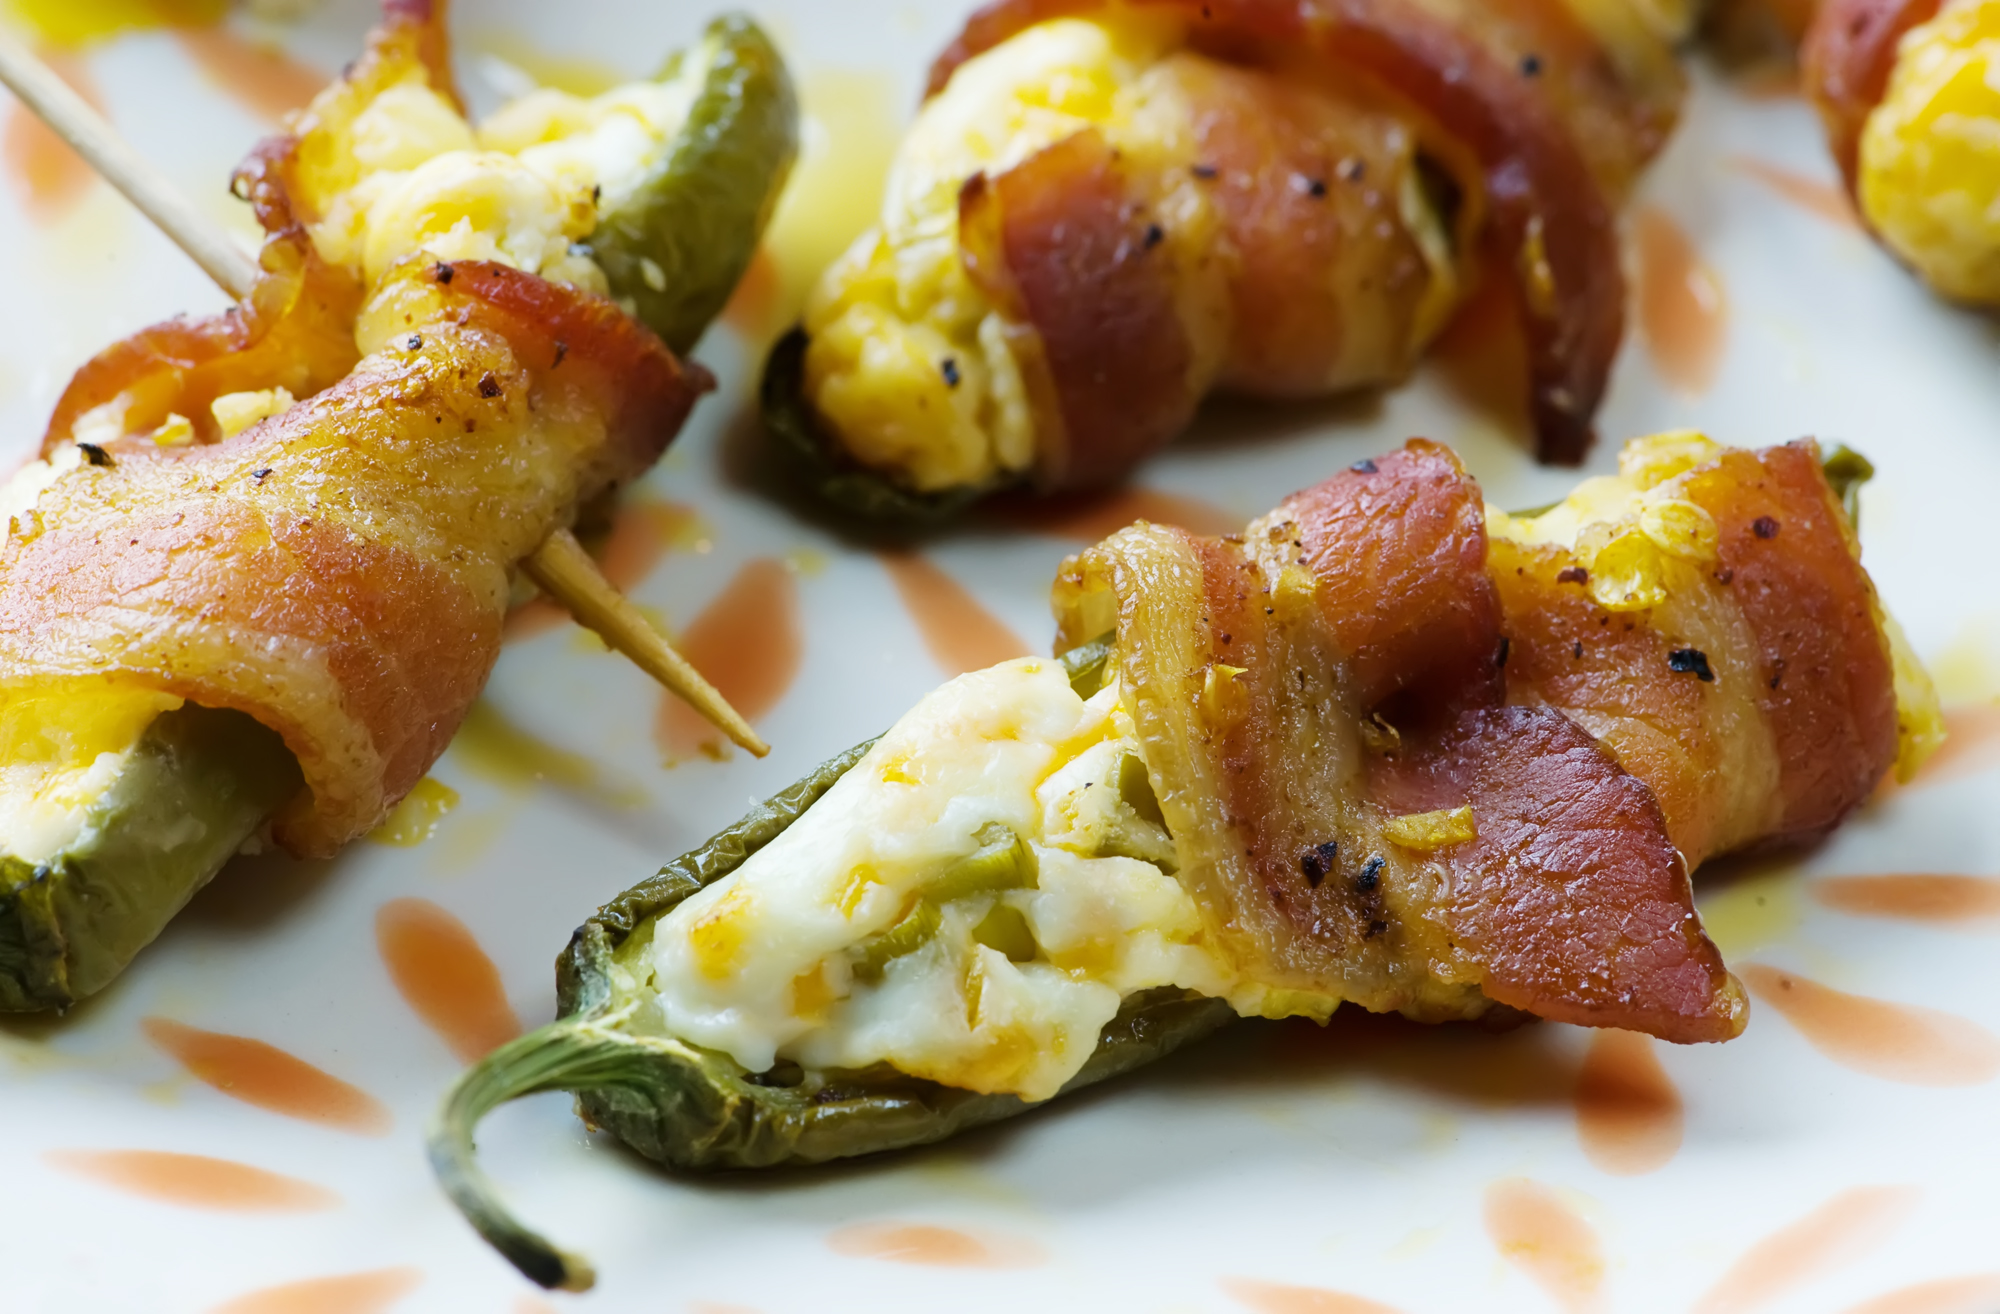 Jalapeno poppers on a plate.